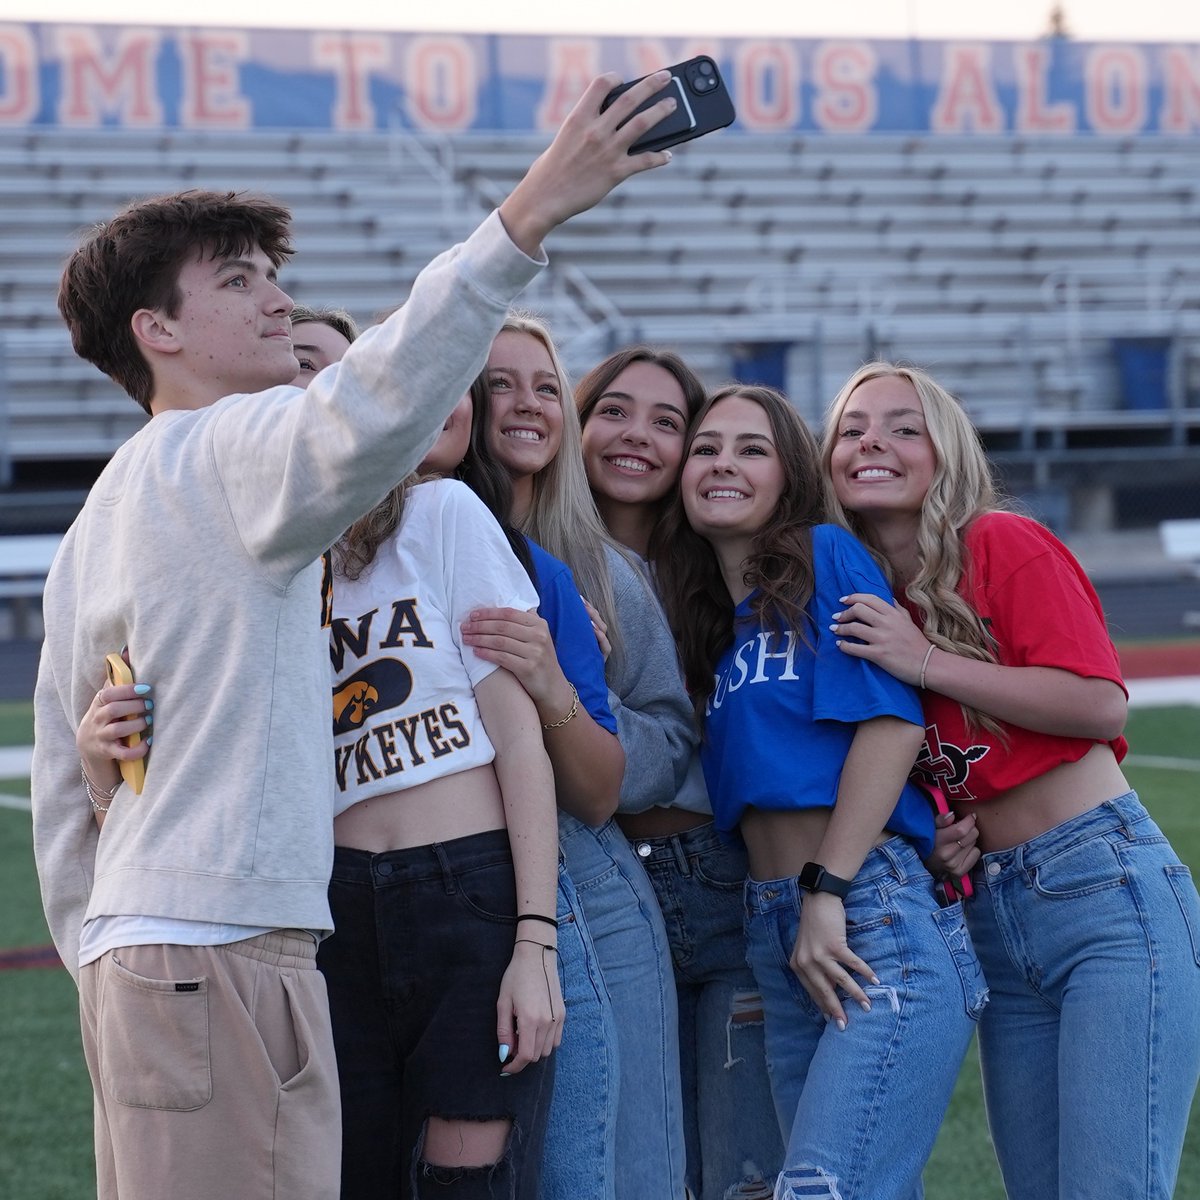 Senior Chargers soak up the rays of Senior Sunrise and their final days together as high school seniors! Here's to cherished memories, lasting friendships, and the bright future ahead.